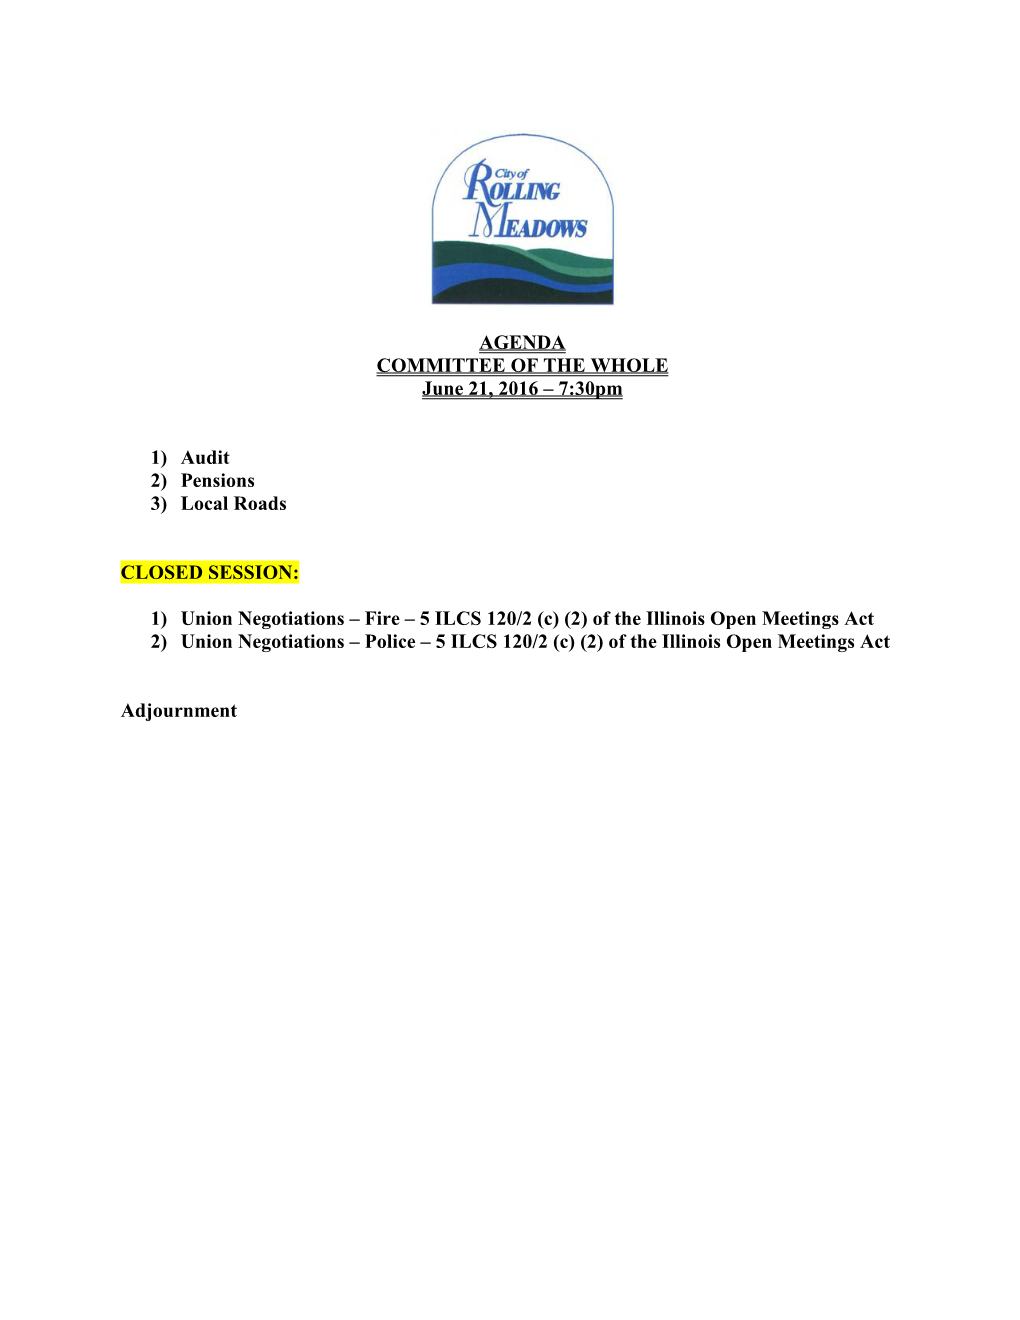 AGENDA COMMITTEE of the WHOLE June 21, 2016 – 7:30Pm